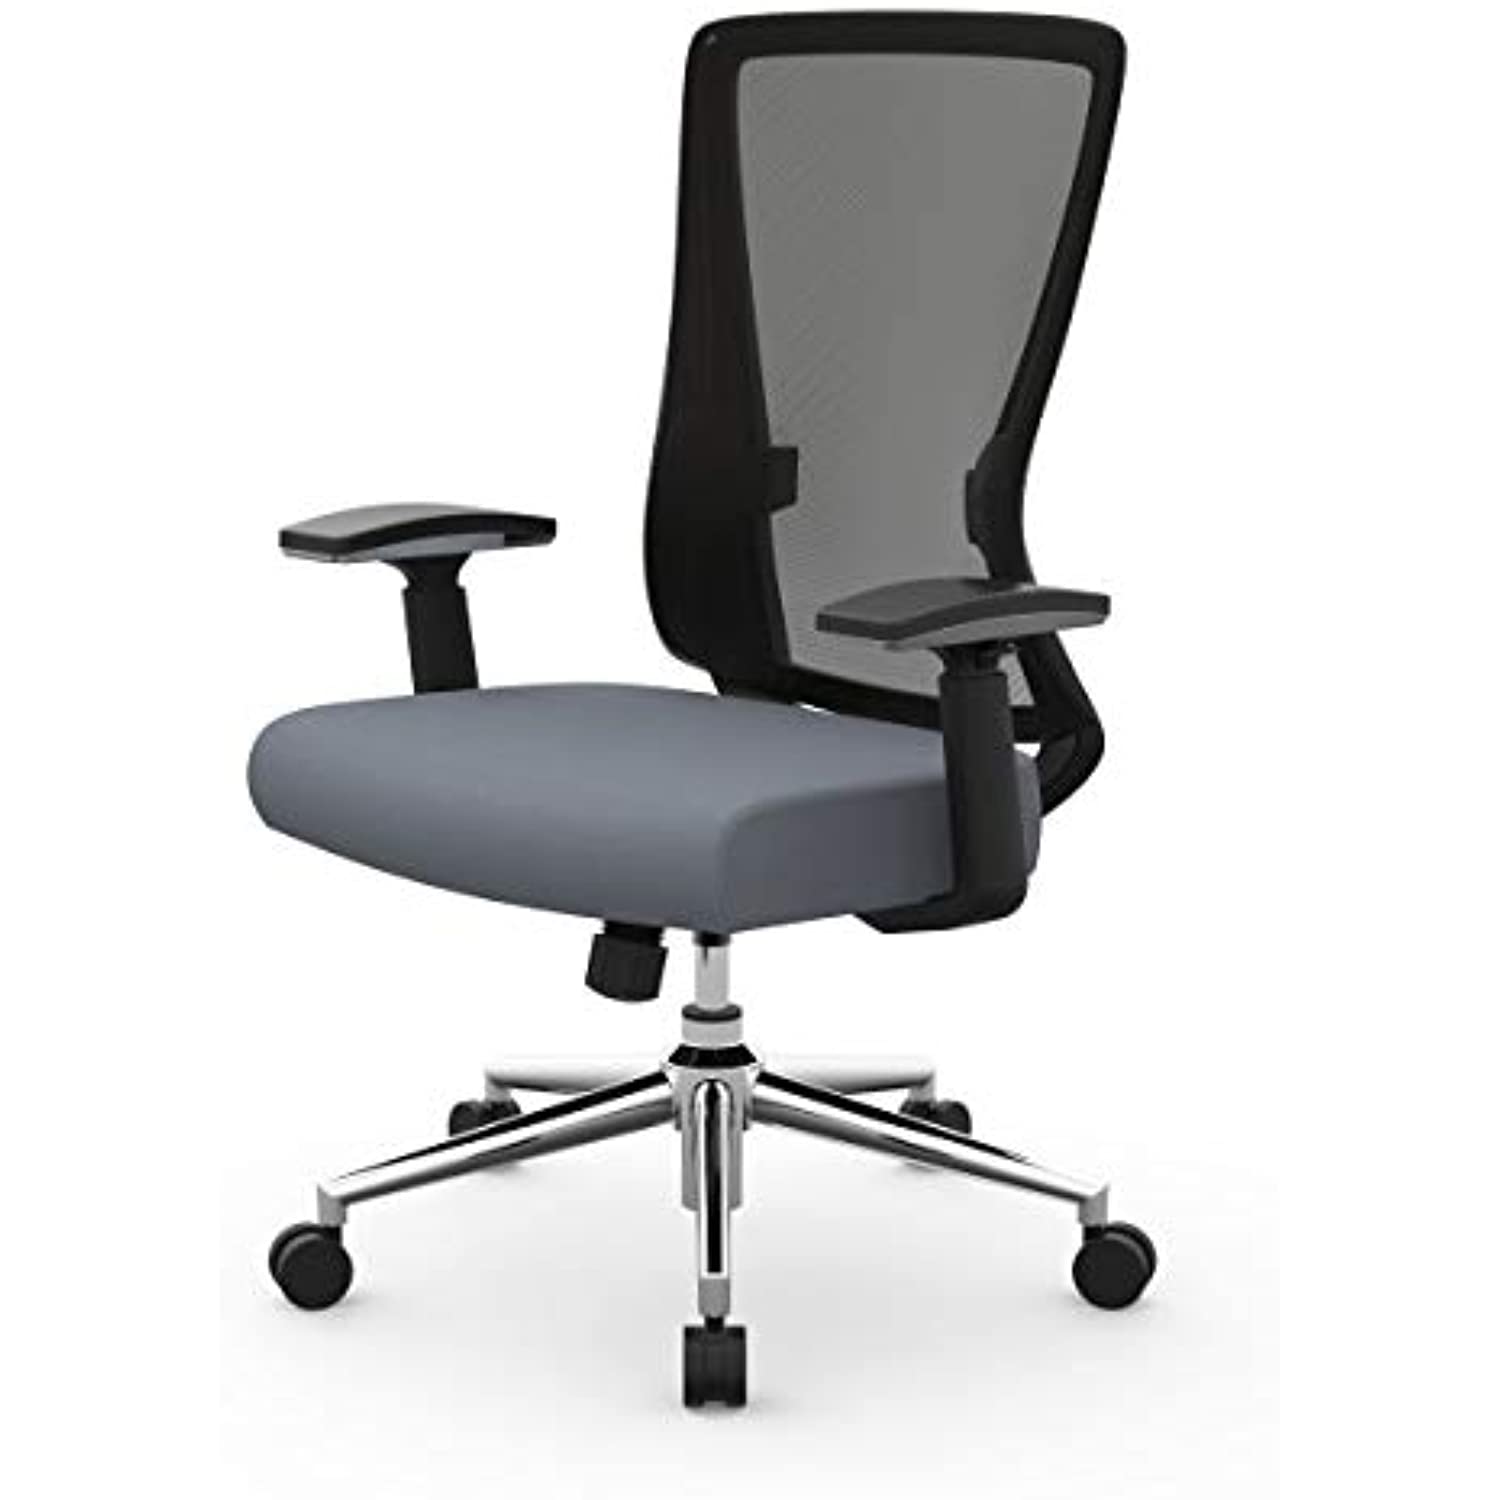 Realspace Levari Faux Leather Mid-Back Task Chair, Gray/Black - image 3 of 8